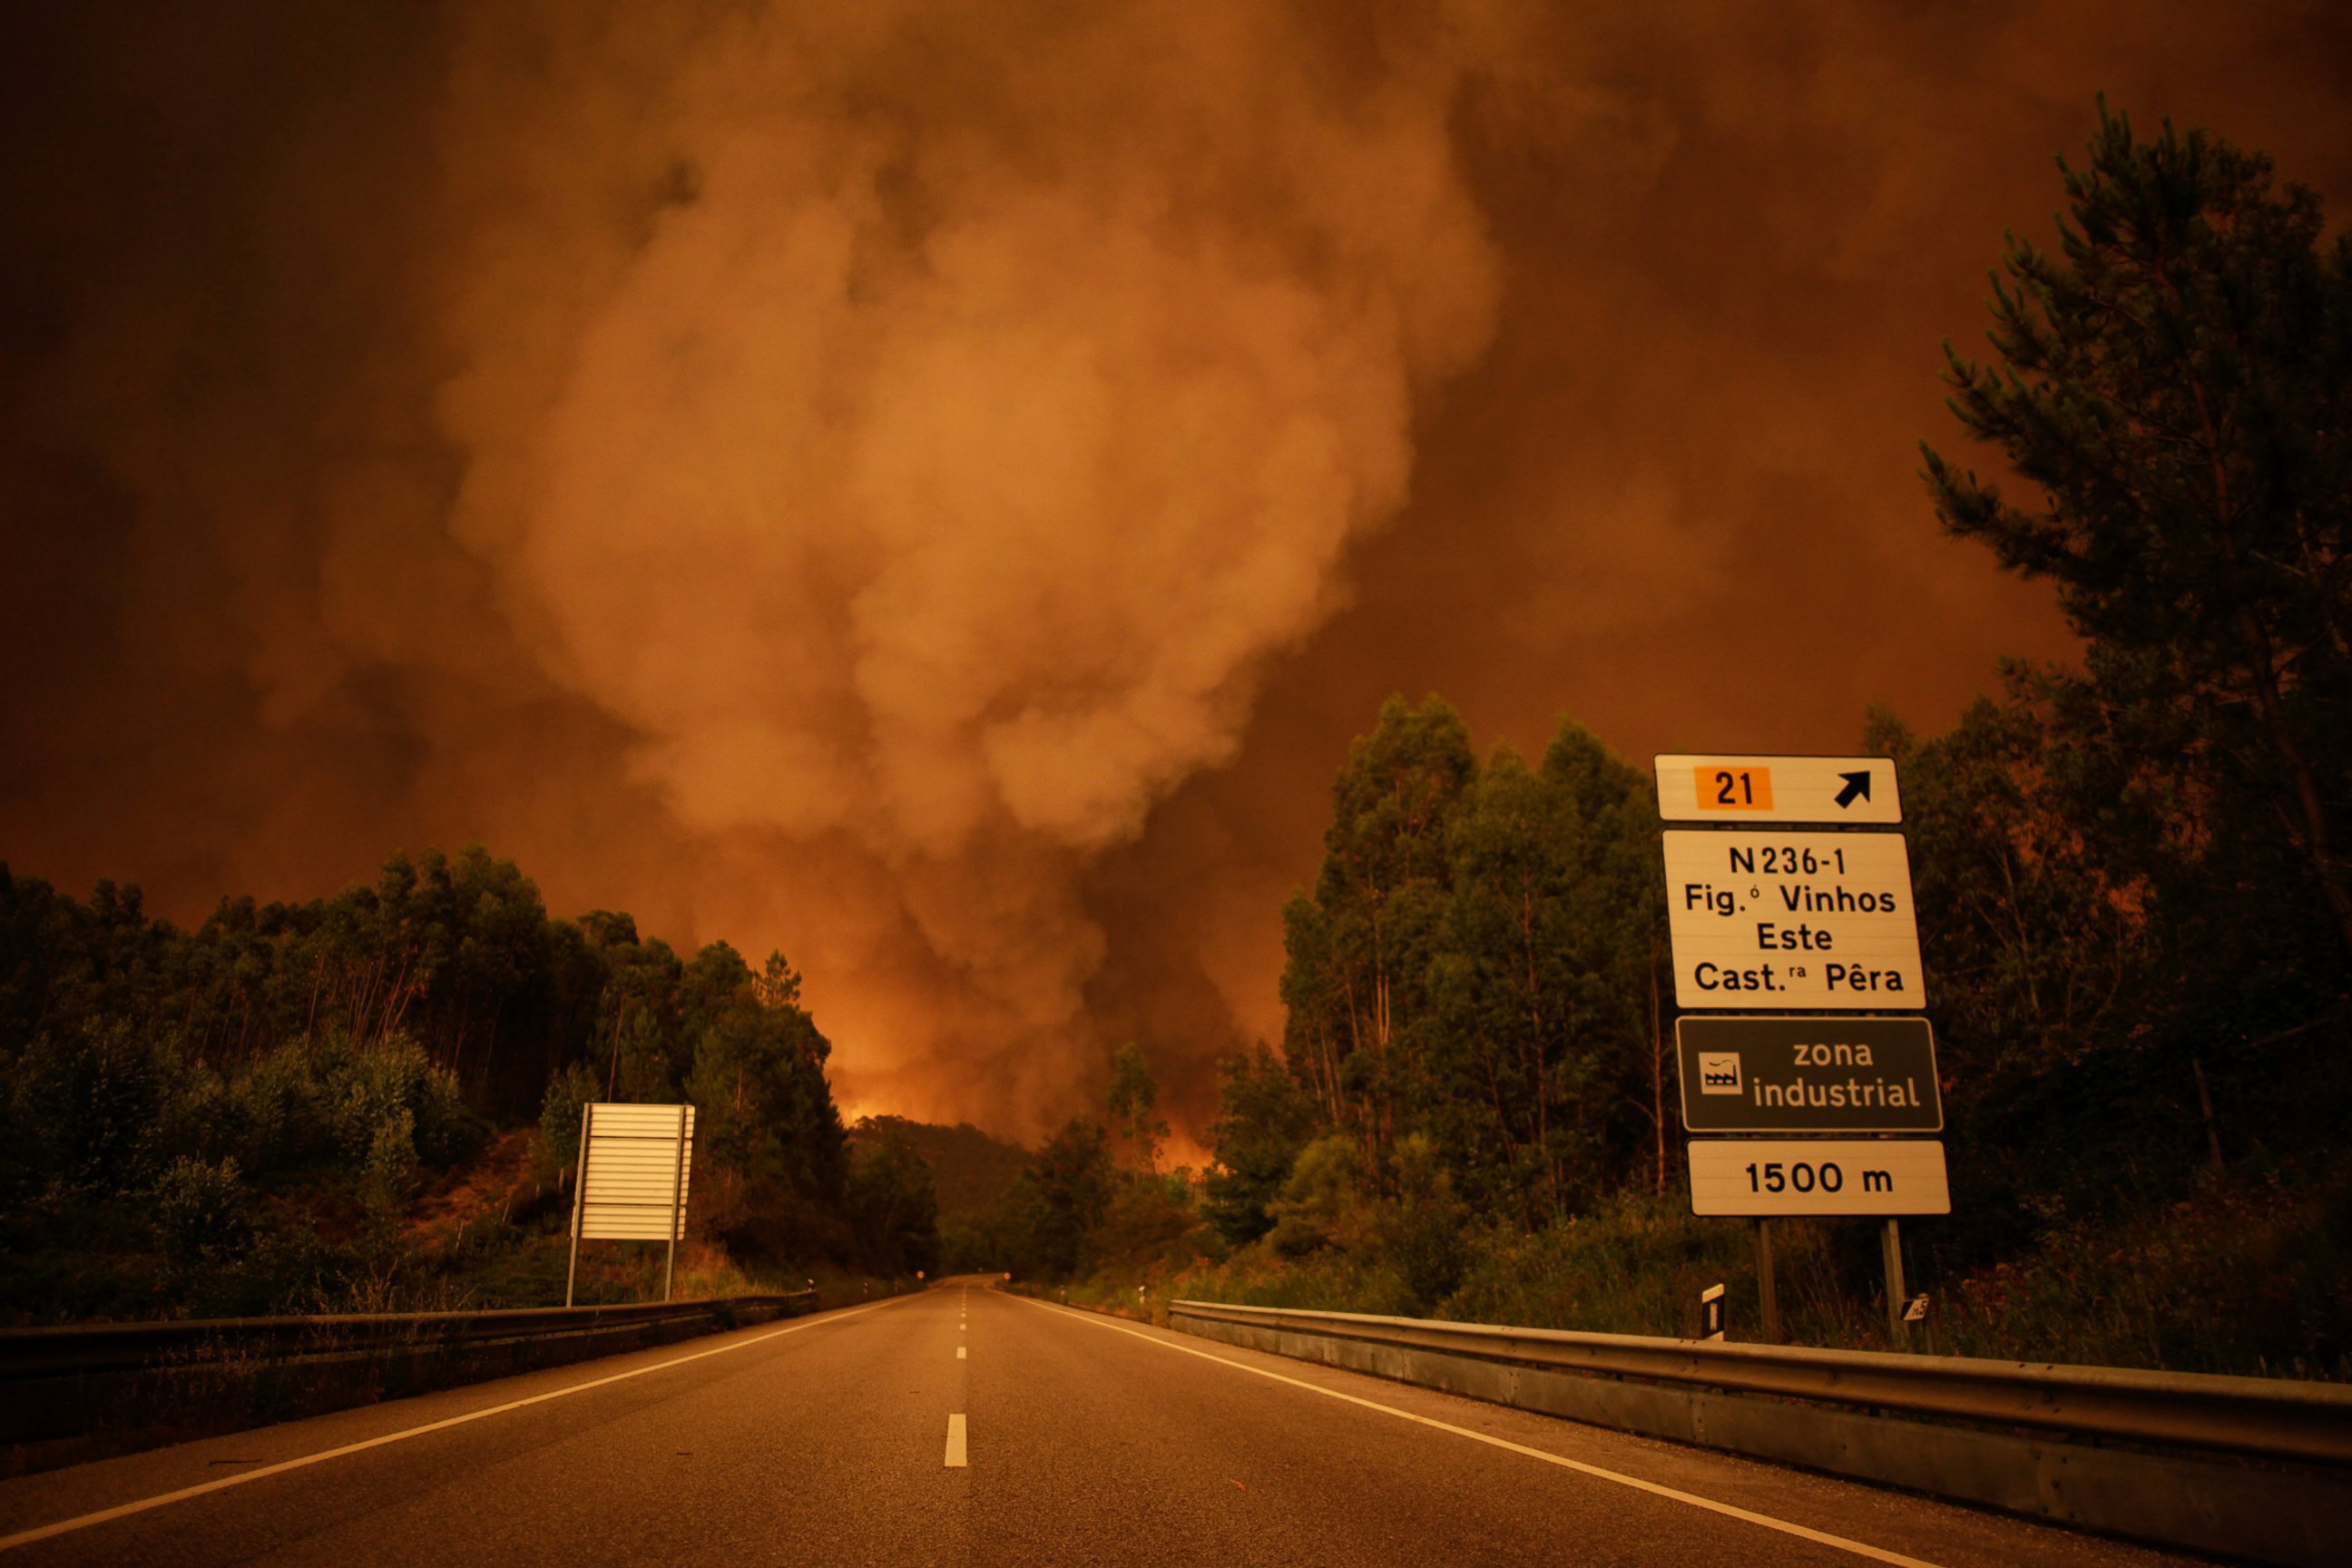 PHOTO: Smoke rises above trees during a forest fire in Pedrogao Grande, Leiria District, Portugal, June 17, 2017. 